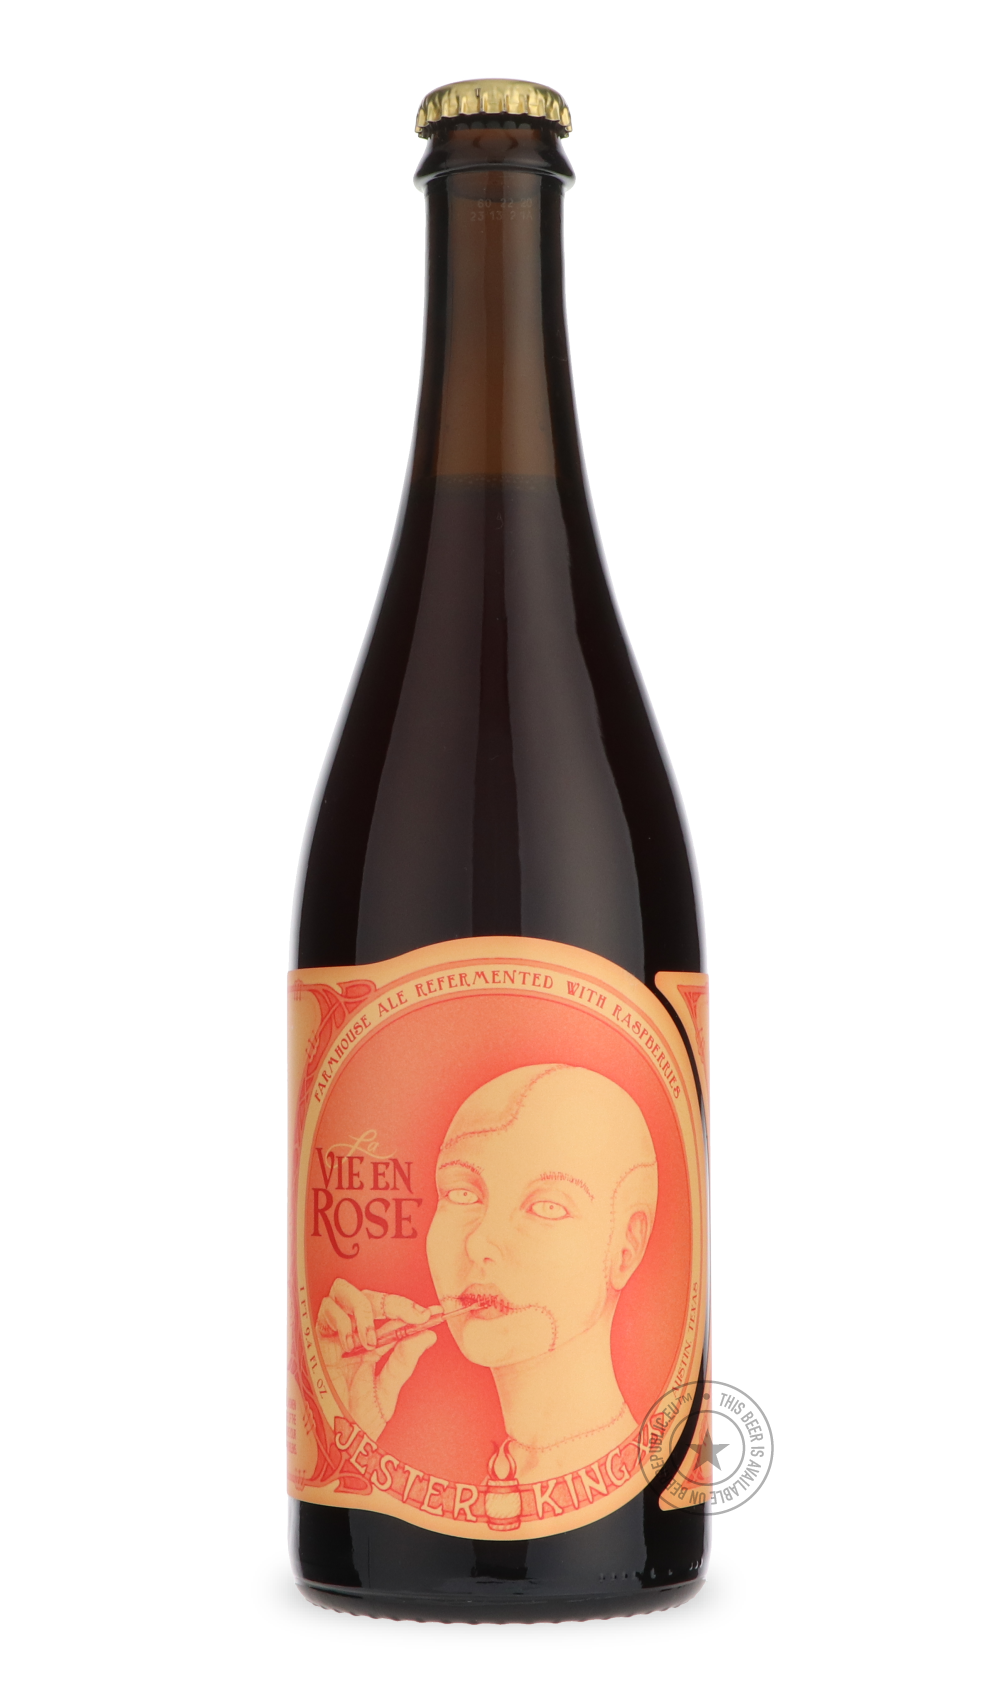 -Jester King- La Vie En Rose-Sour / Wild & Fruity- Only @ Beer Republic - The best online beer store for American & Canadian craft beer - Buy beer online from the USA and Canada - Bier online kopen - Amerikaans bier kopen - Craft beer store - Craft beer kopen - Amerikanisch bier kaufen - Bier online kaufen - Acheter biere online - IPA - Stout - Porter - New England IPA - Hazy IPA - Imperial Stout - Barrel Aged - Barrel Aged Imperial Stout - Brown - Dark beer - Blond - Blonde - Pilsner - Lager - Wheat - Weiz